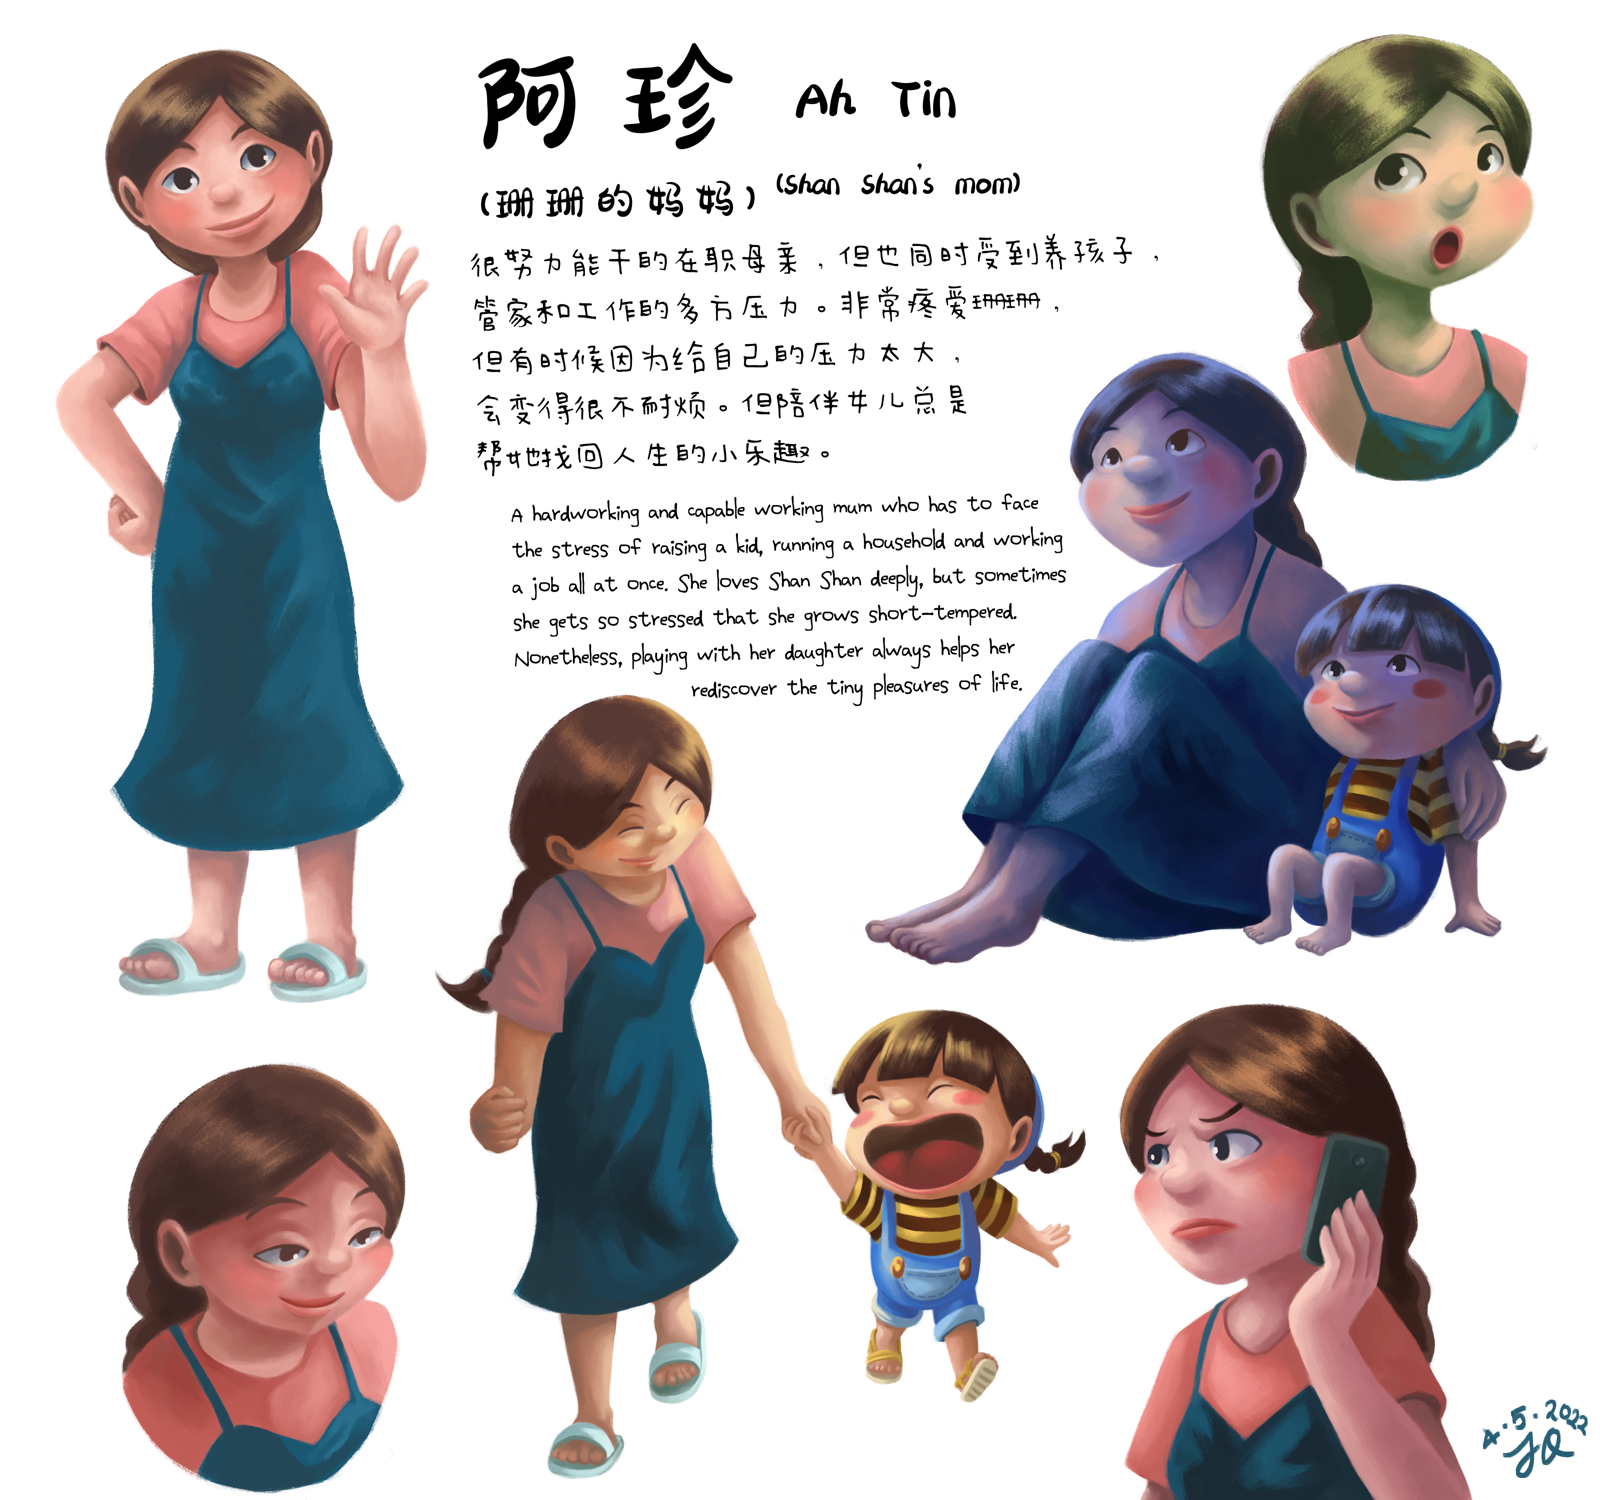 Character design model sheet of Ah Tin, Shan Shan's mother, showing her in a few different poses and expressions, some together with Shan Shan.